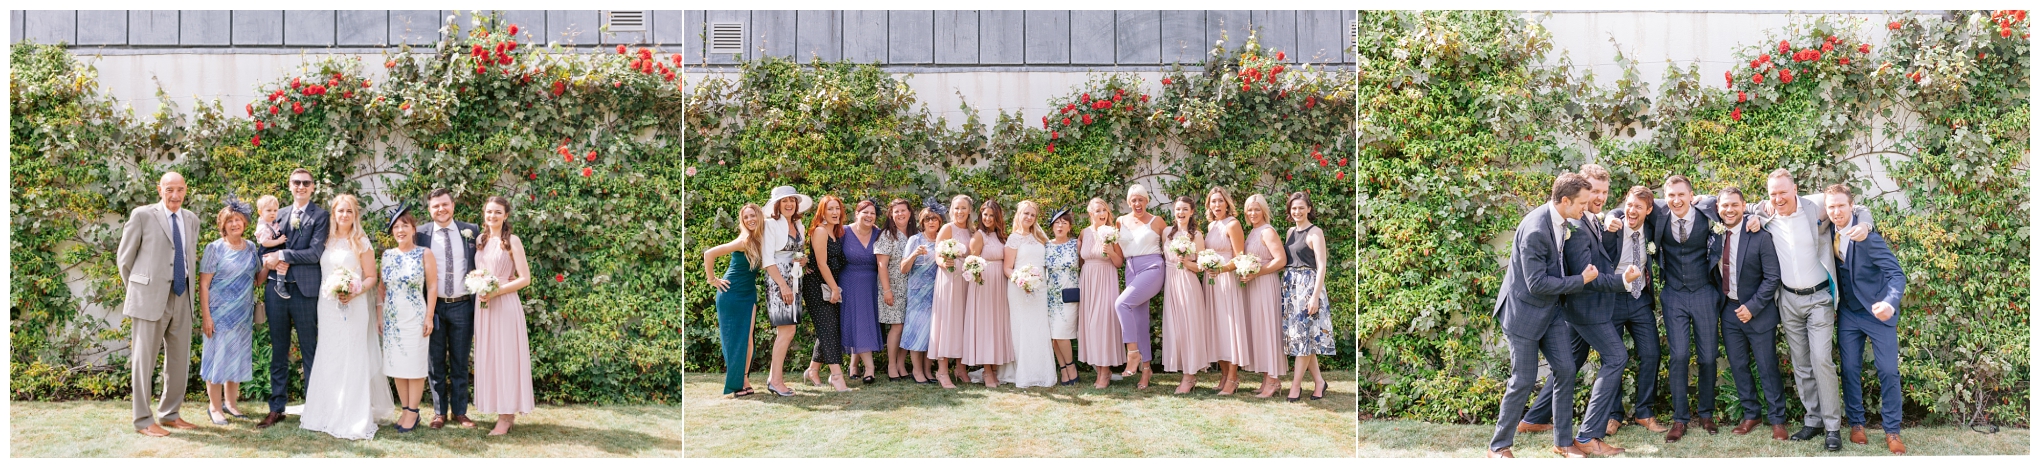 Relaxed Group images at Hartsfield Manor